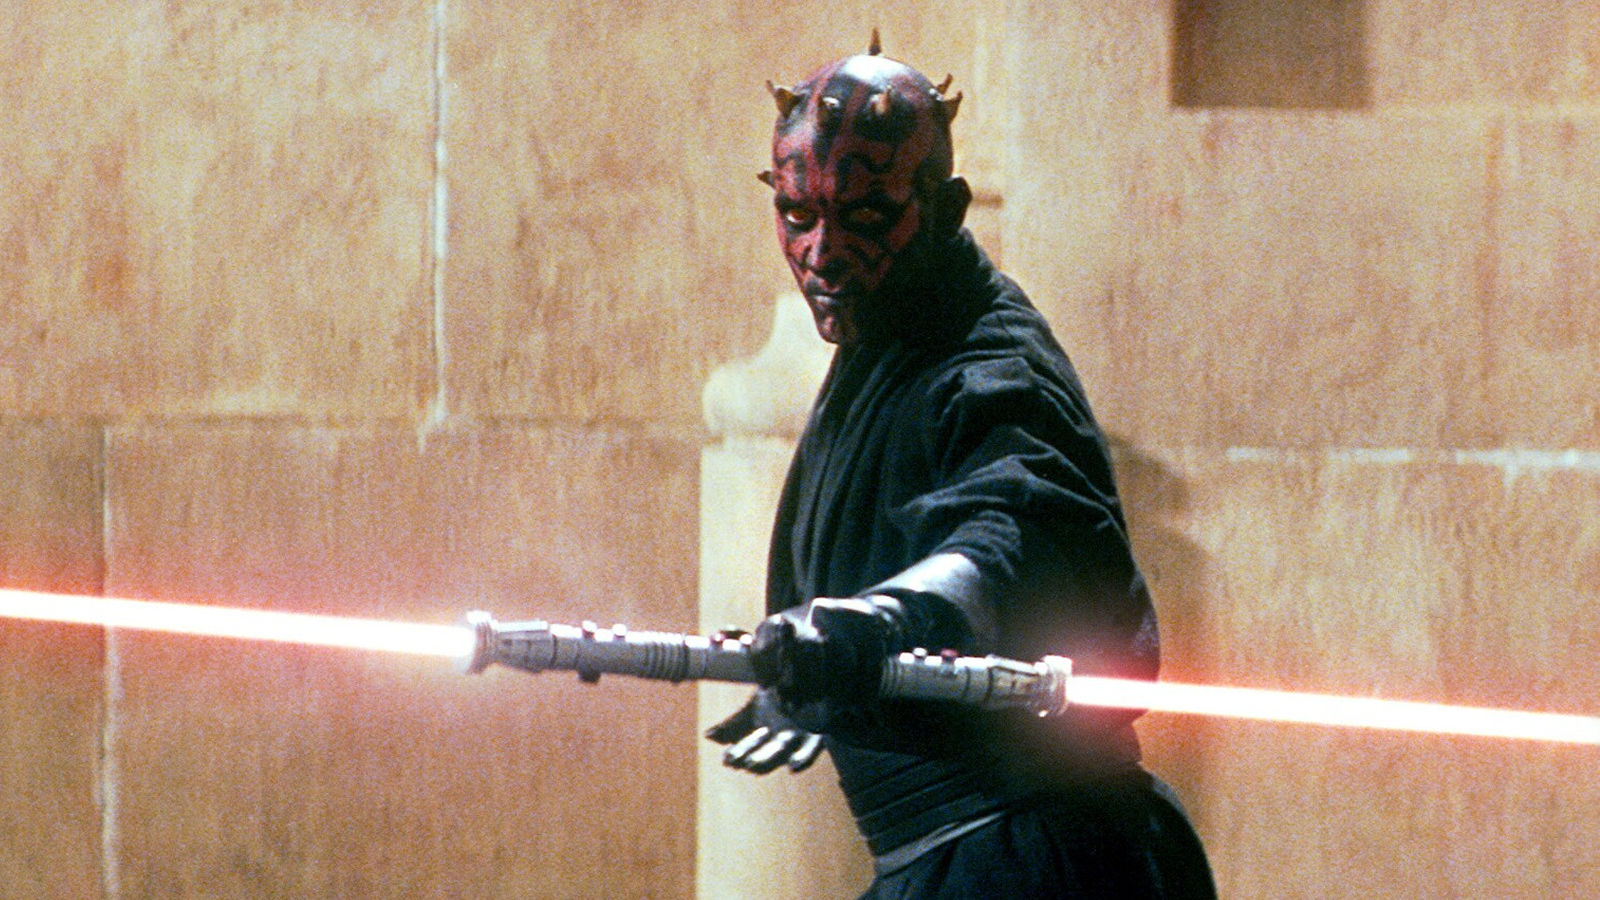 Darth Maul ignites his double-bladed lightsaber in Star Wars: The Phantom Menace